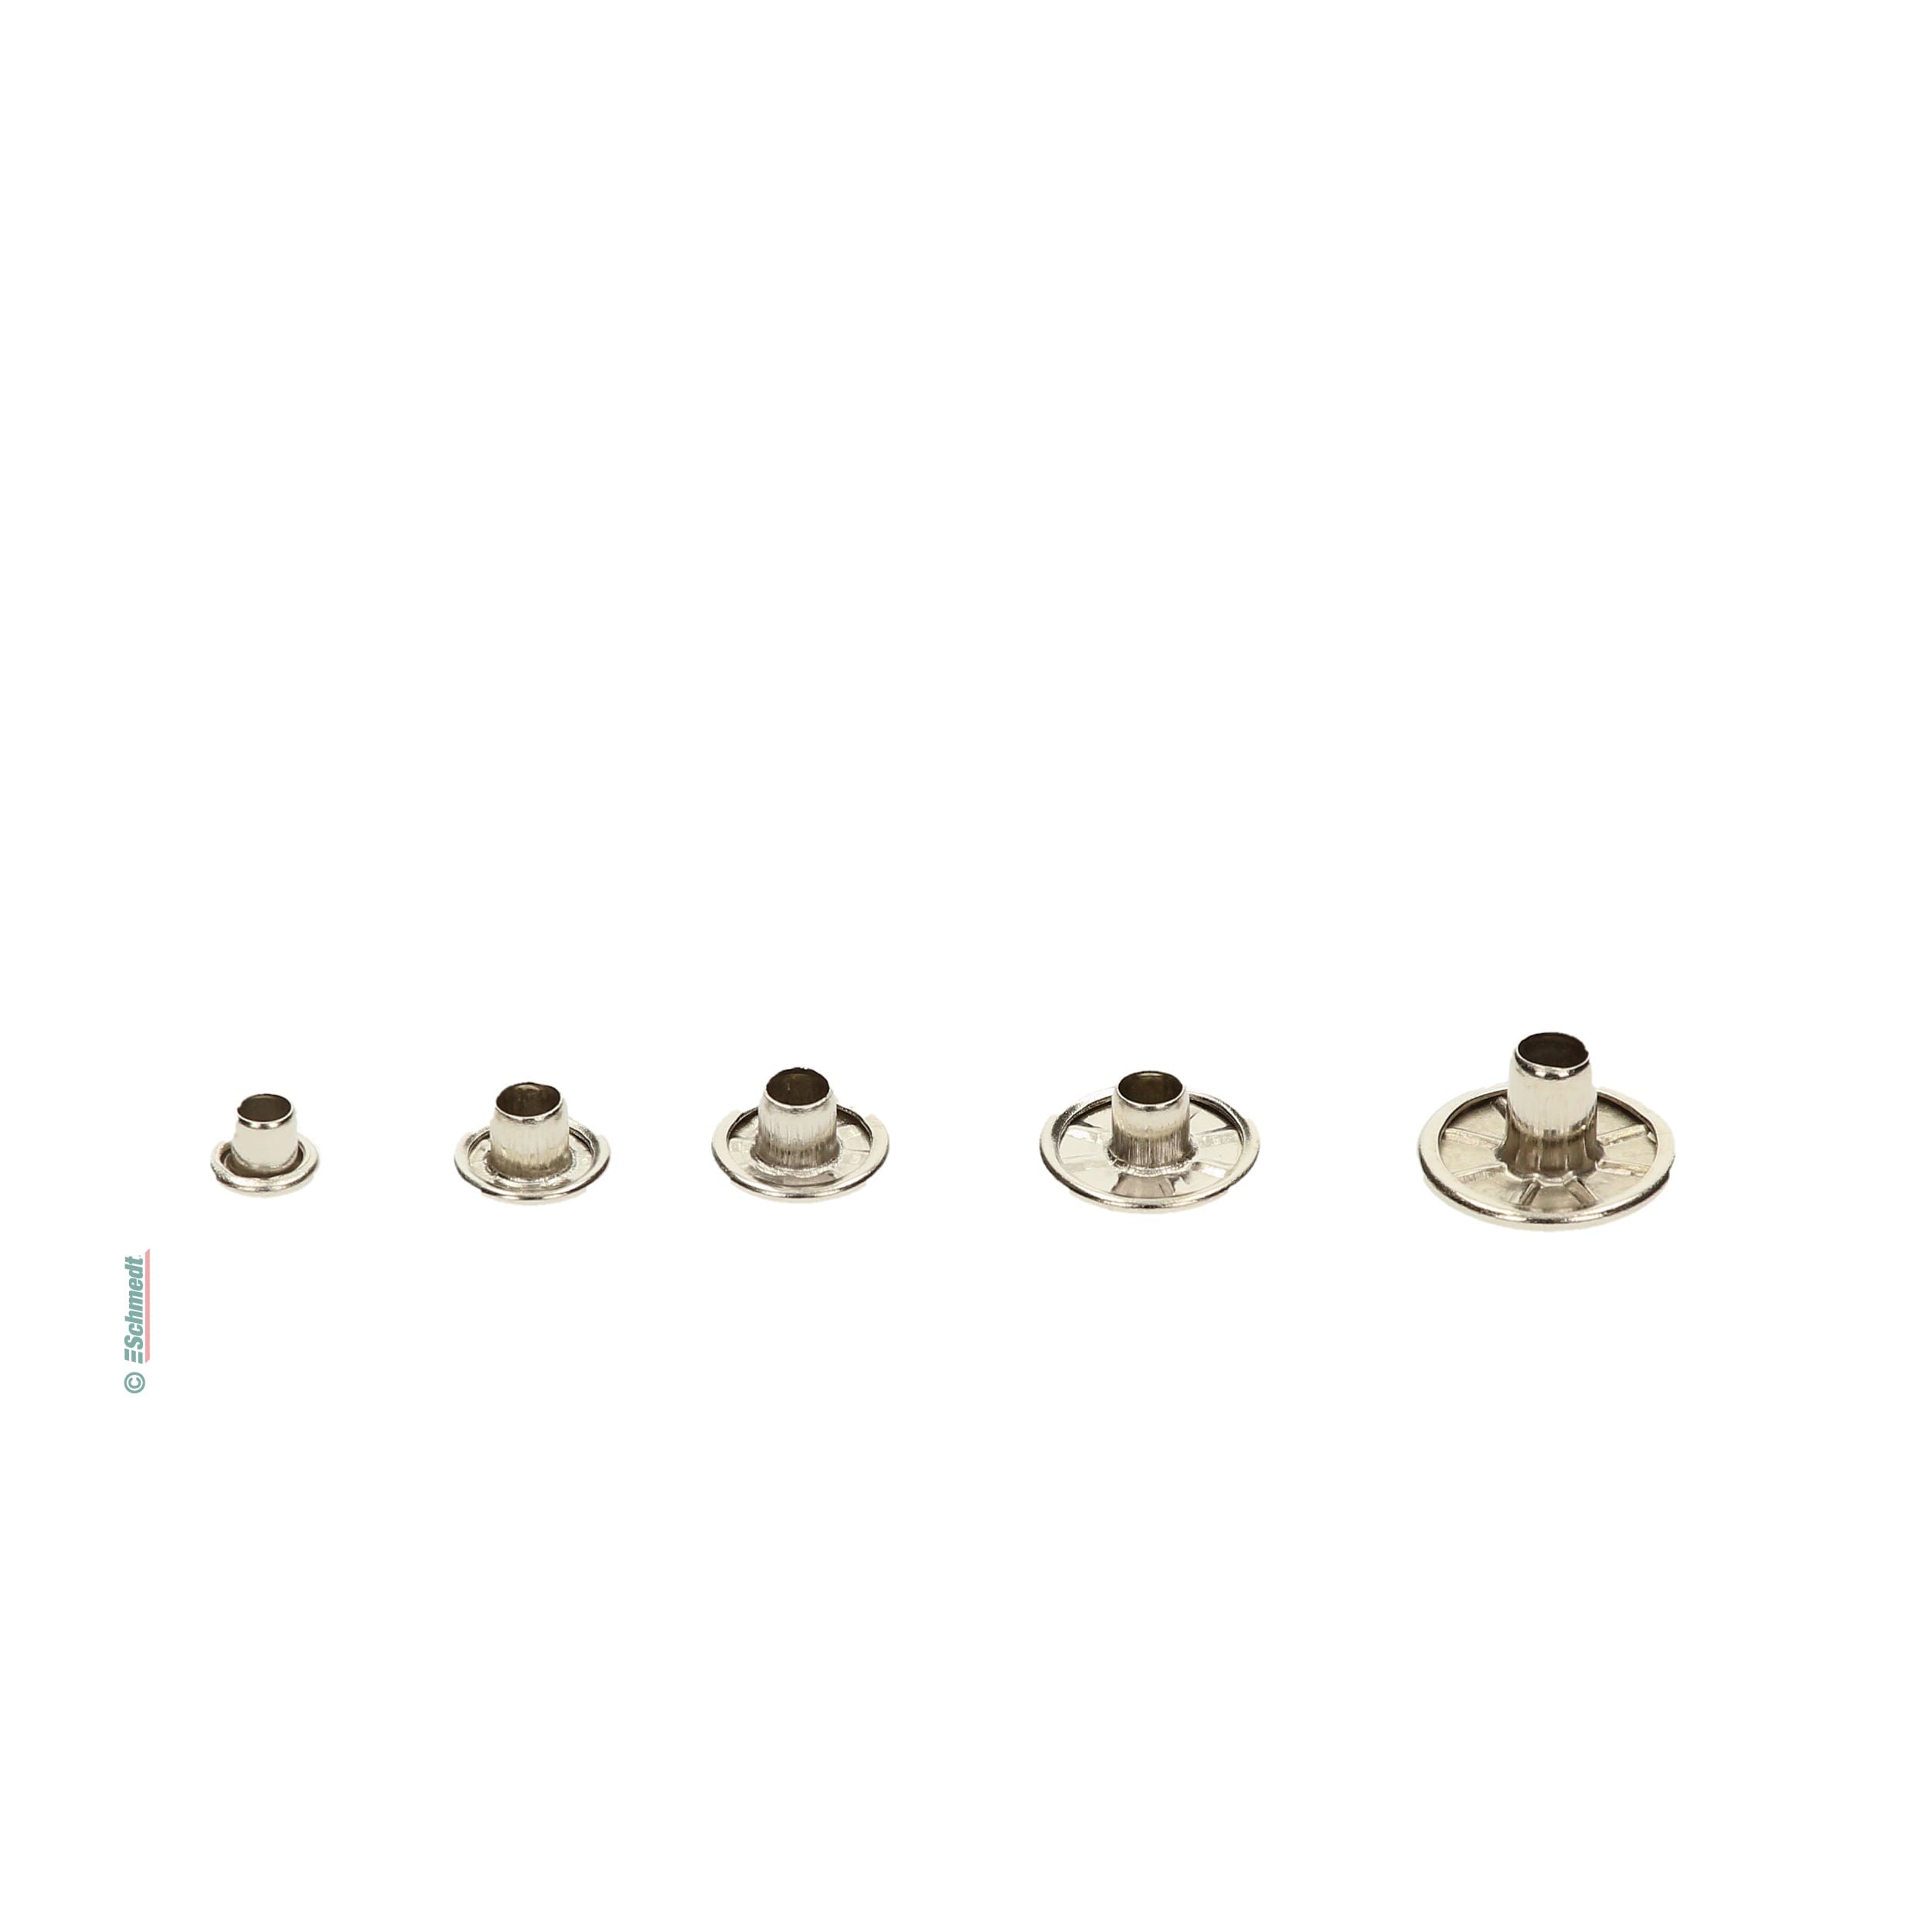 Female piece of two-piece rivets - NB: Male pieces to be ordered separately! - Hollow rivets always consist of 2 parts, male and female.
Th...